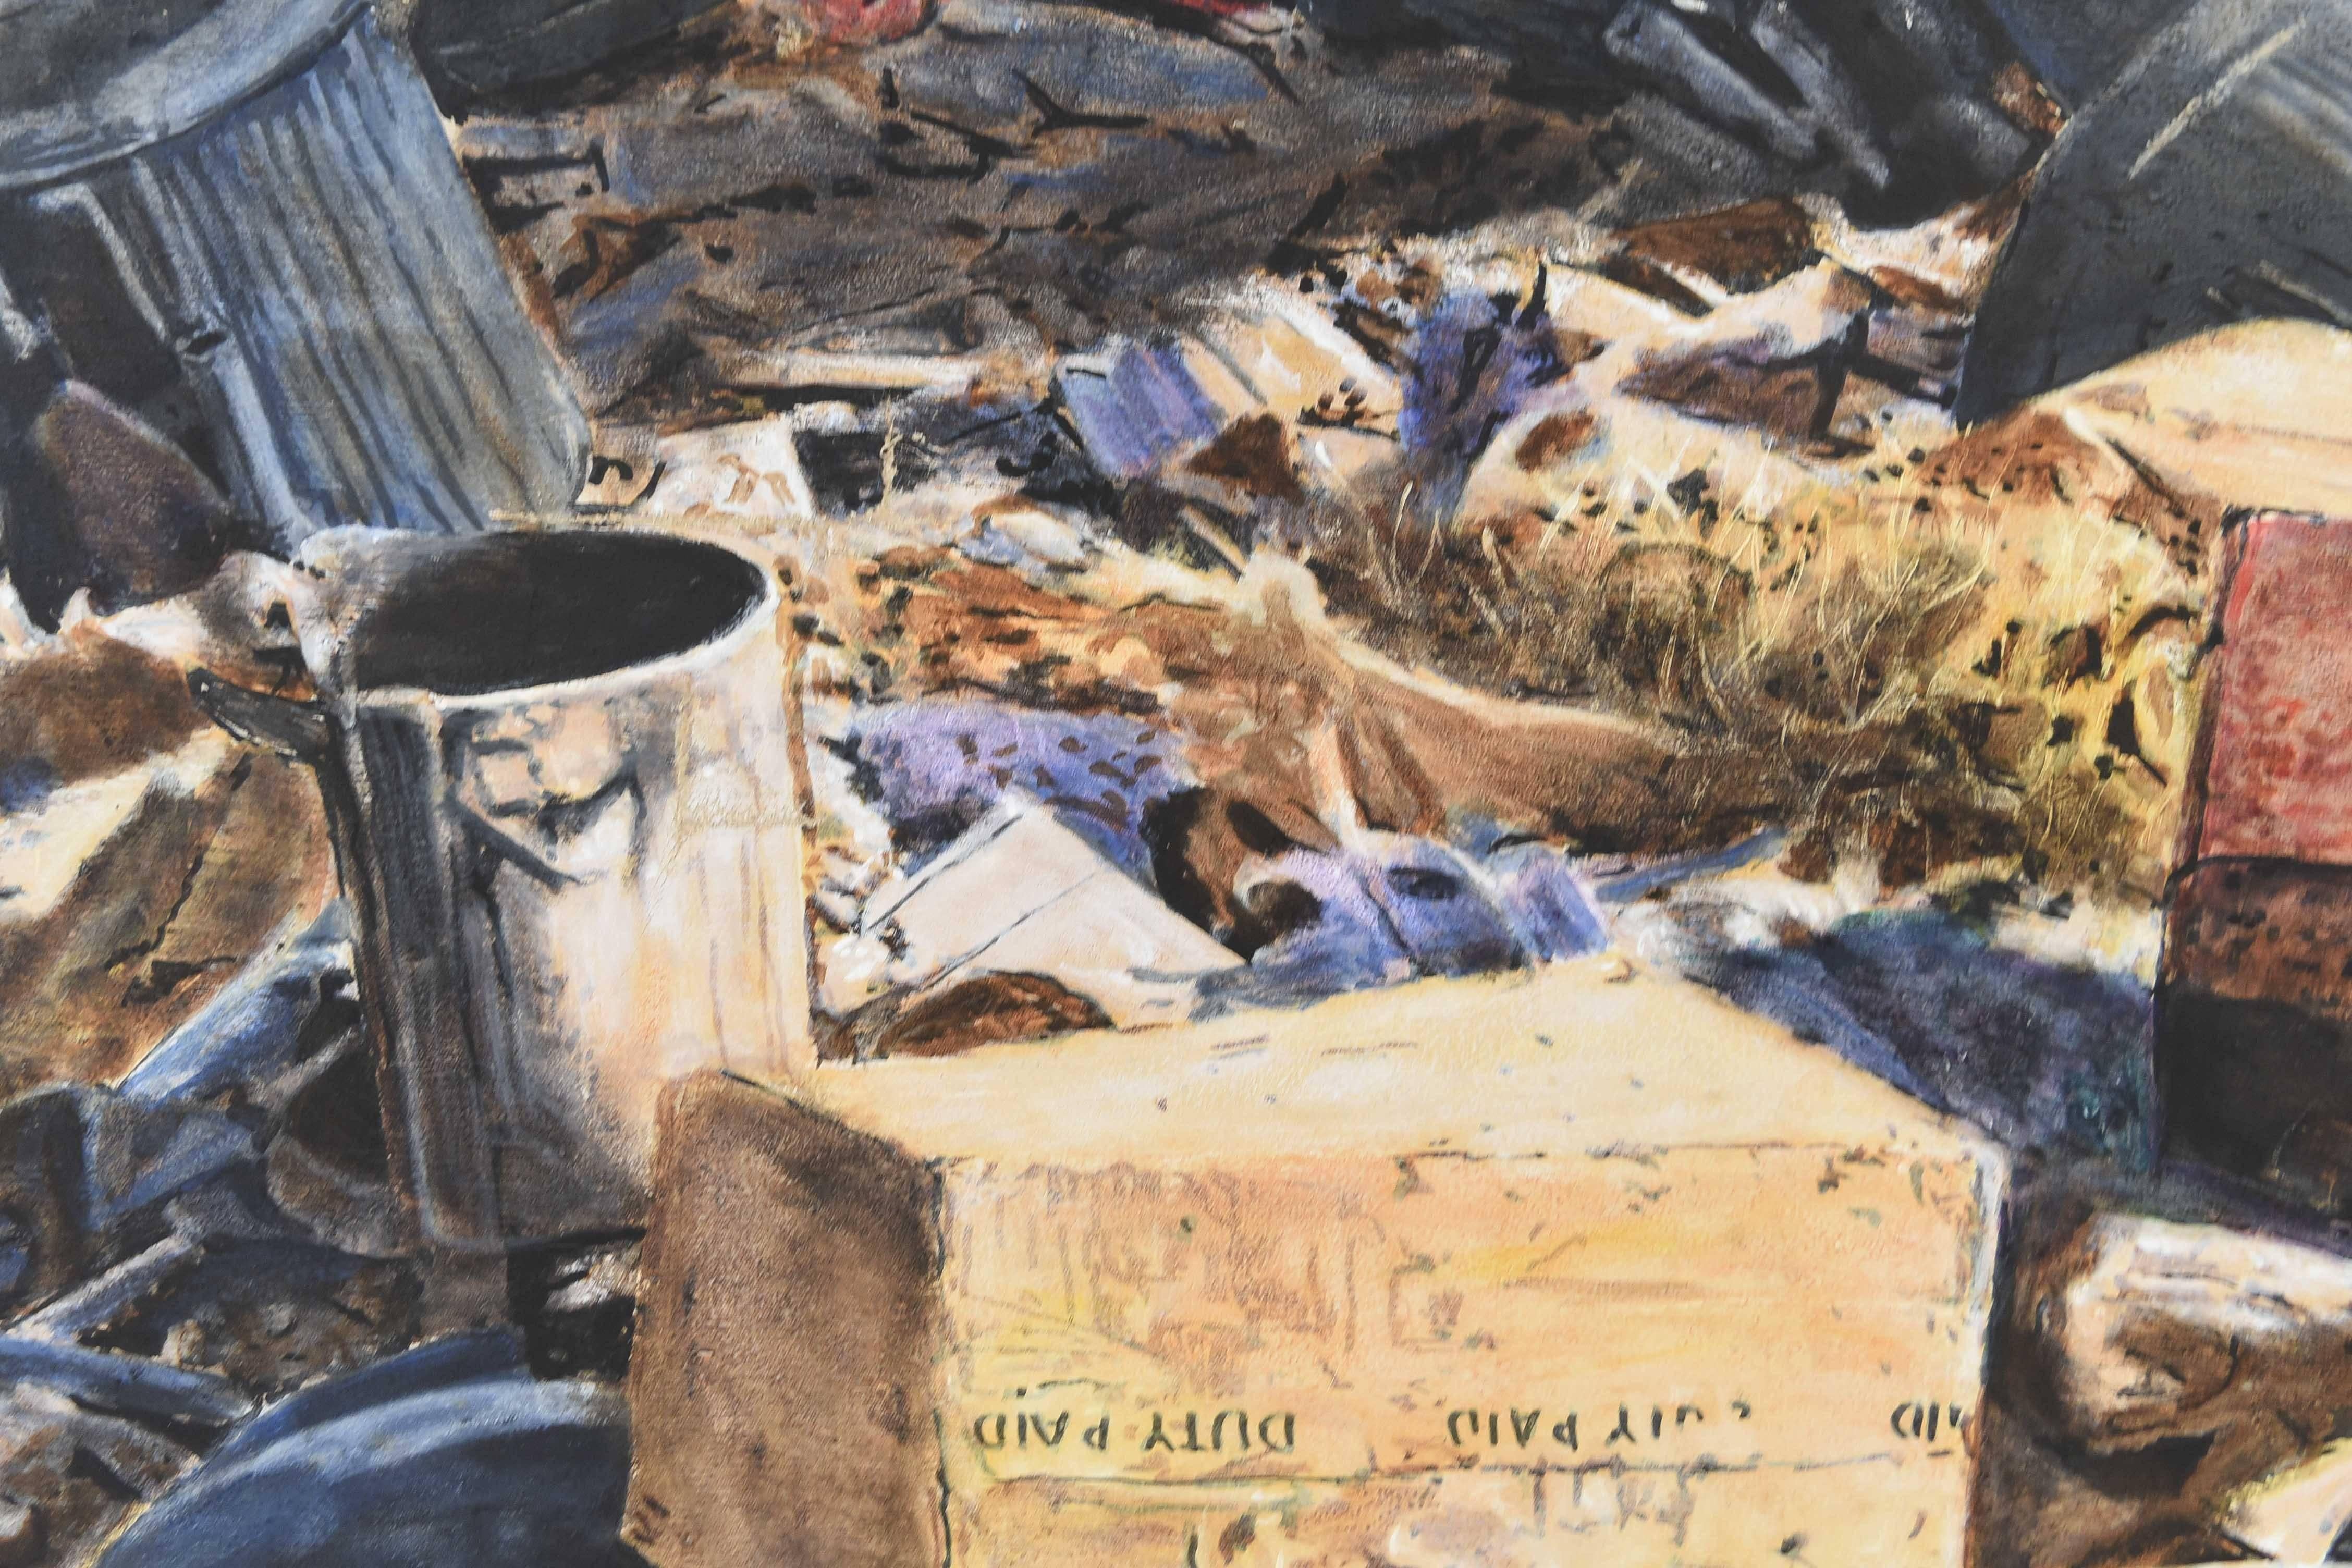 20th Century Oil on Canvas of a Landfill in Israel